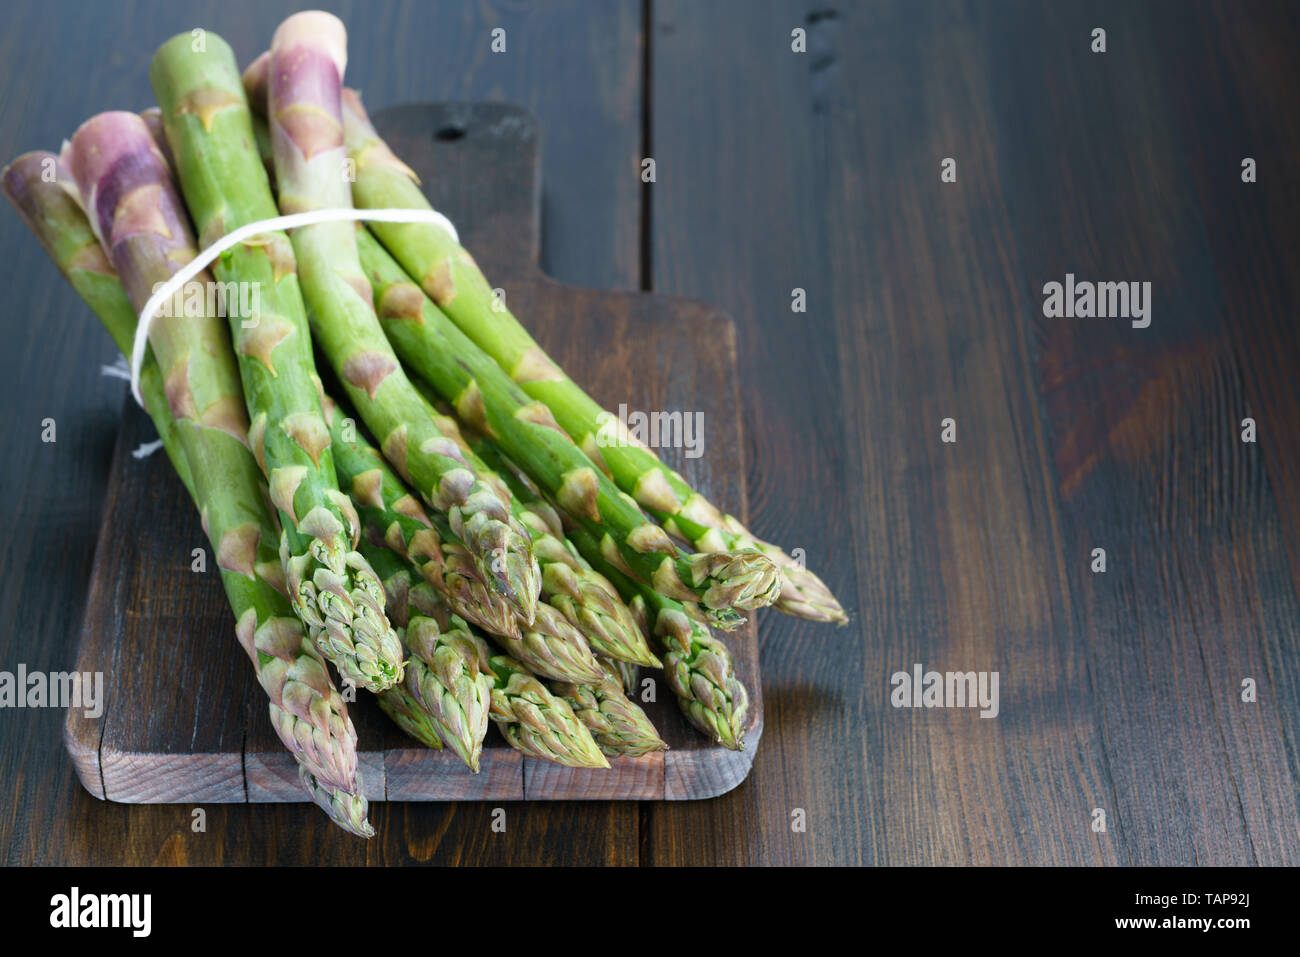 1 lb/0.5 kg of fresh organic asparagus on a wooden table. High resolution Stock Photo